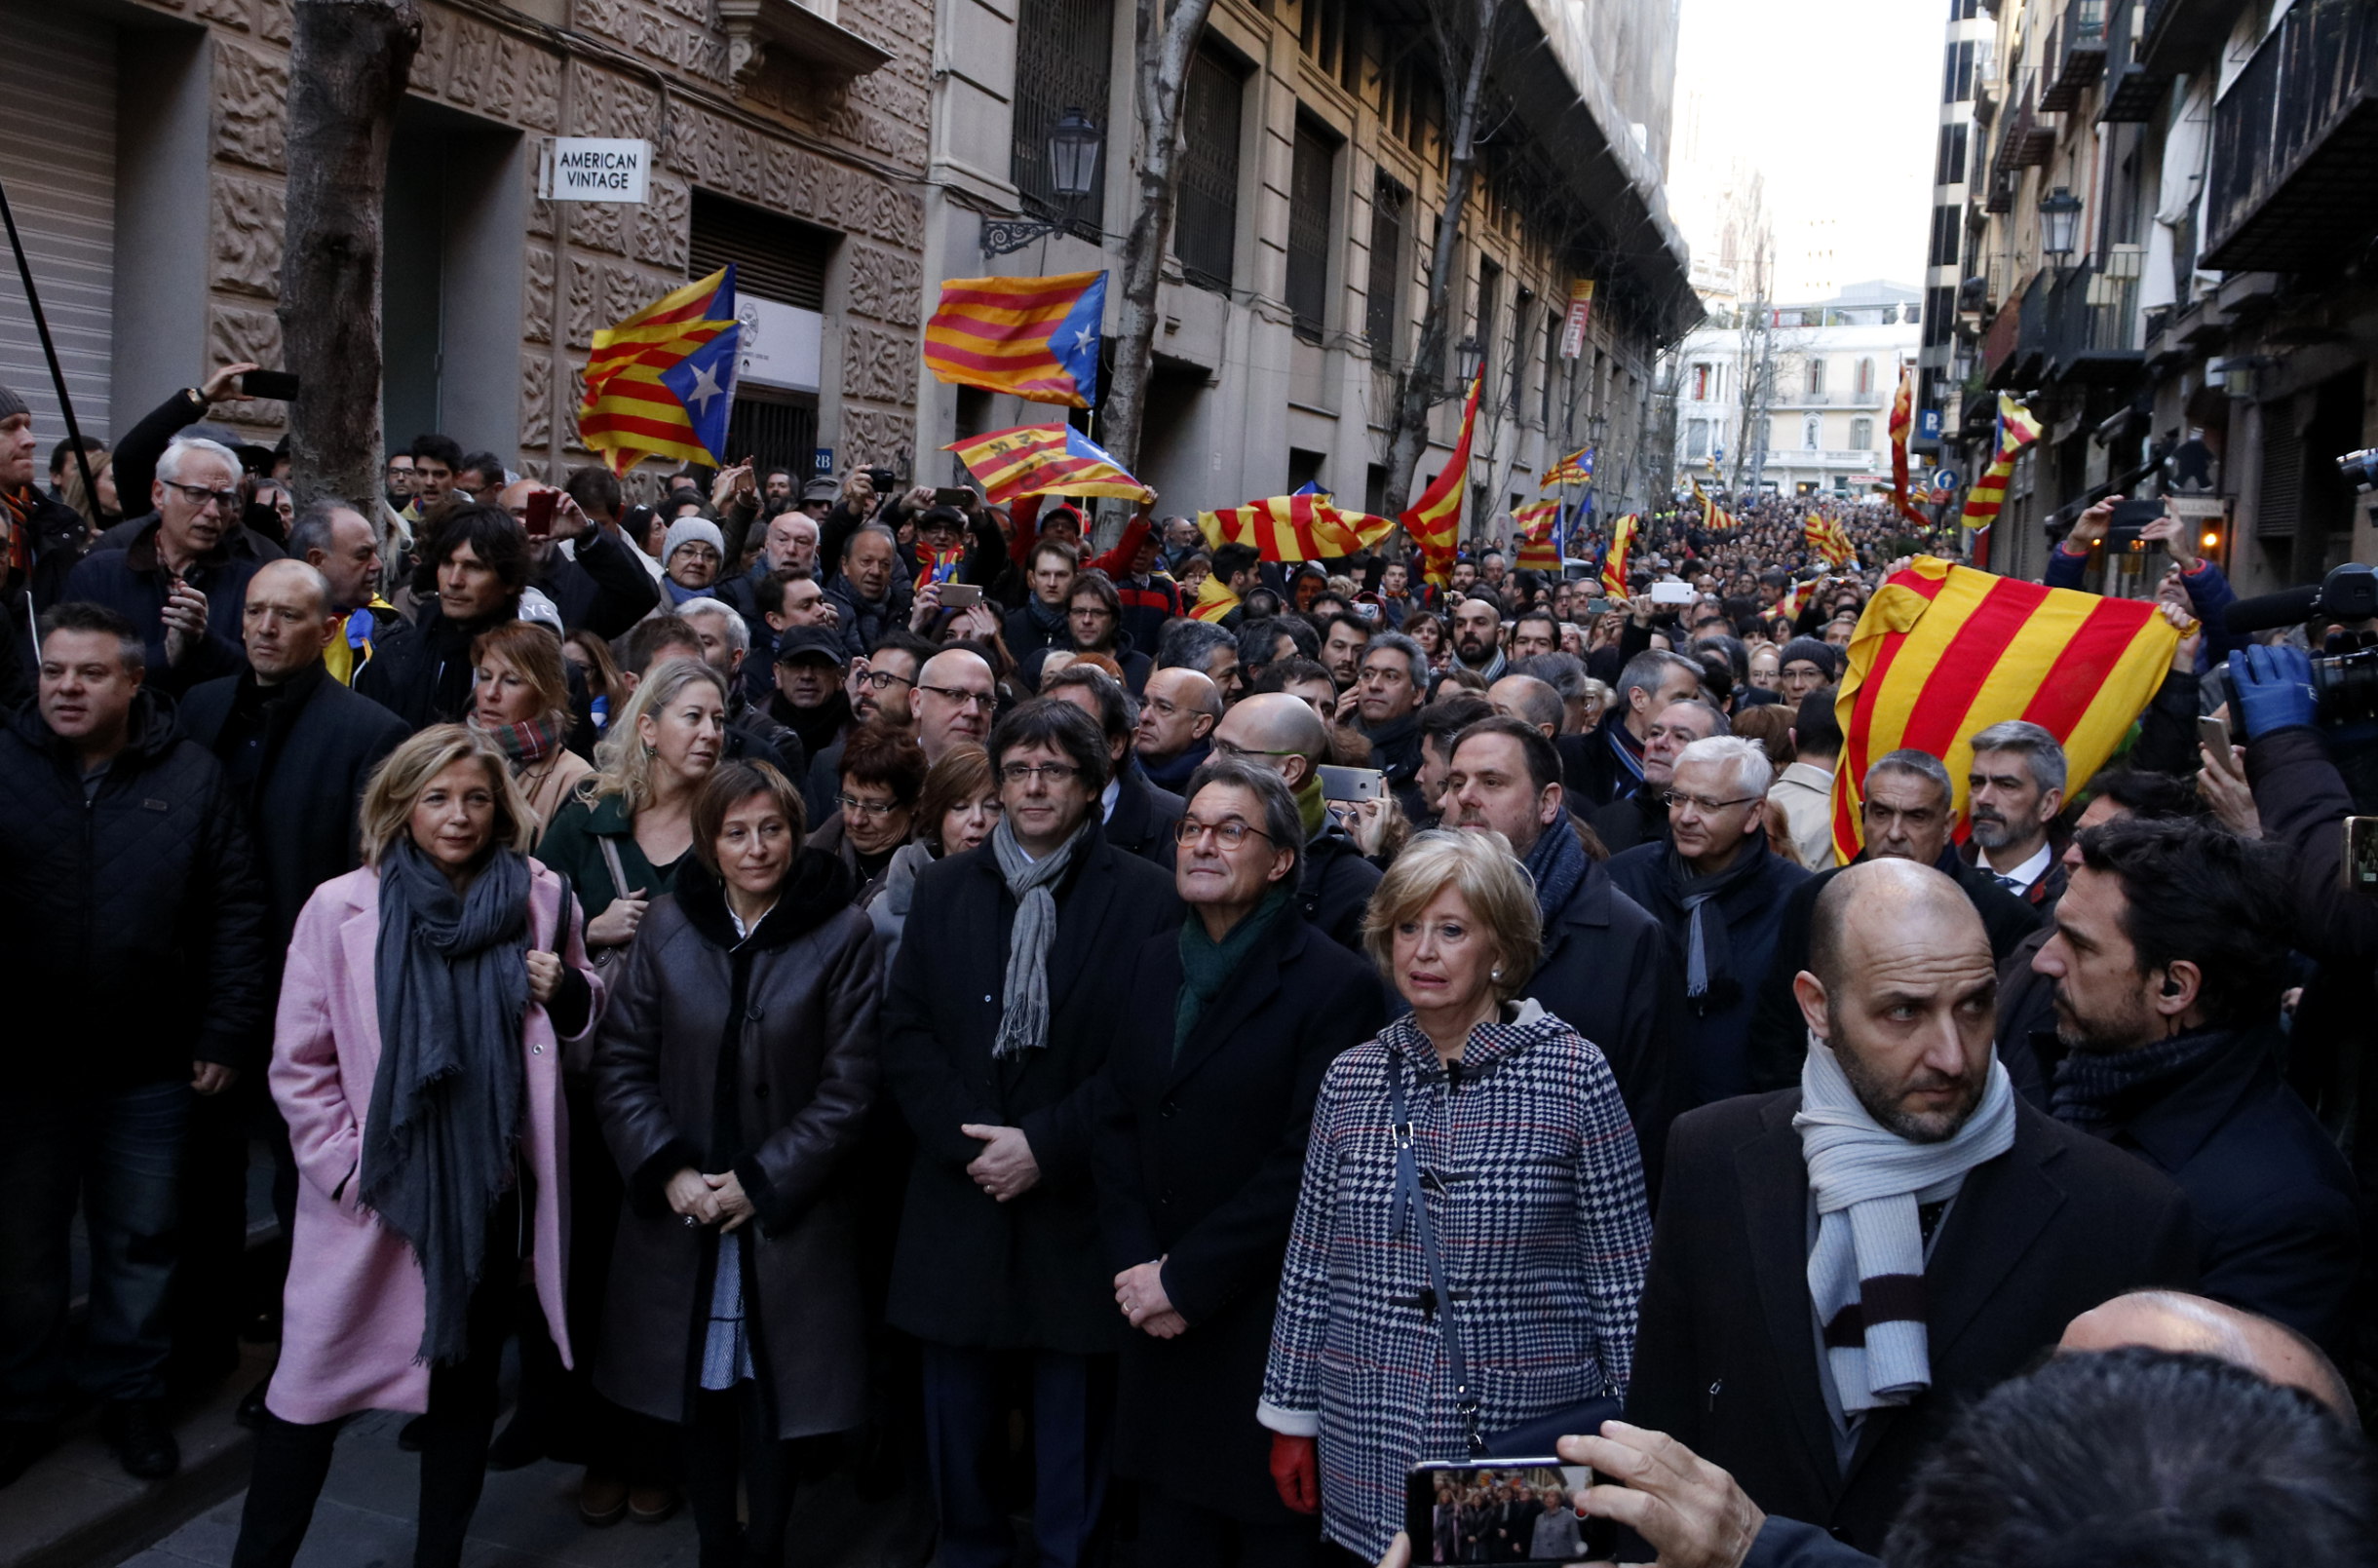 Former Catalan President, Artur Mas, former Catalan vice-president, Joana Ortega and former Catalan Minister for Education, Irene Rigau rallied around on their way to Barcelona's High Court to testify for the 9-N symbolic vote on independence (by ACN)